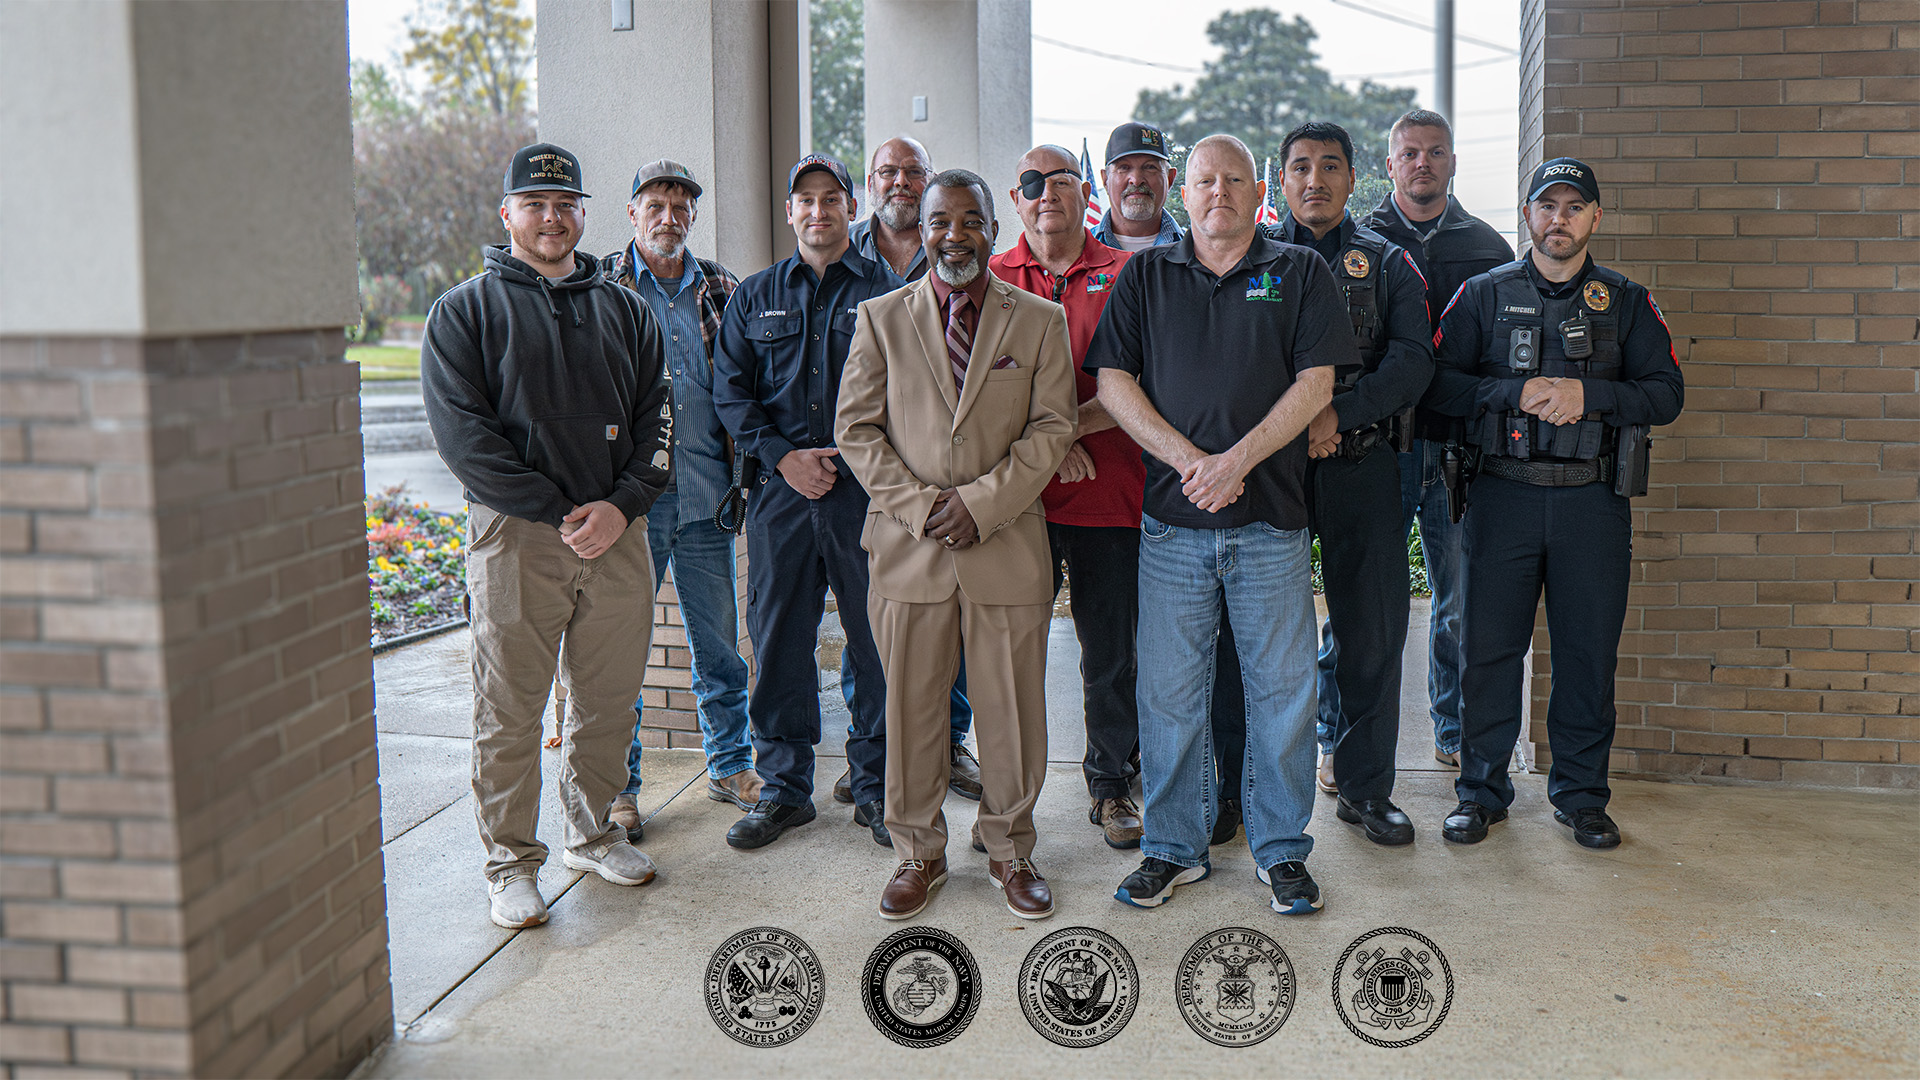 The veteran's who work for or lead the City of Mount Pleasant.